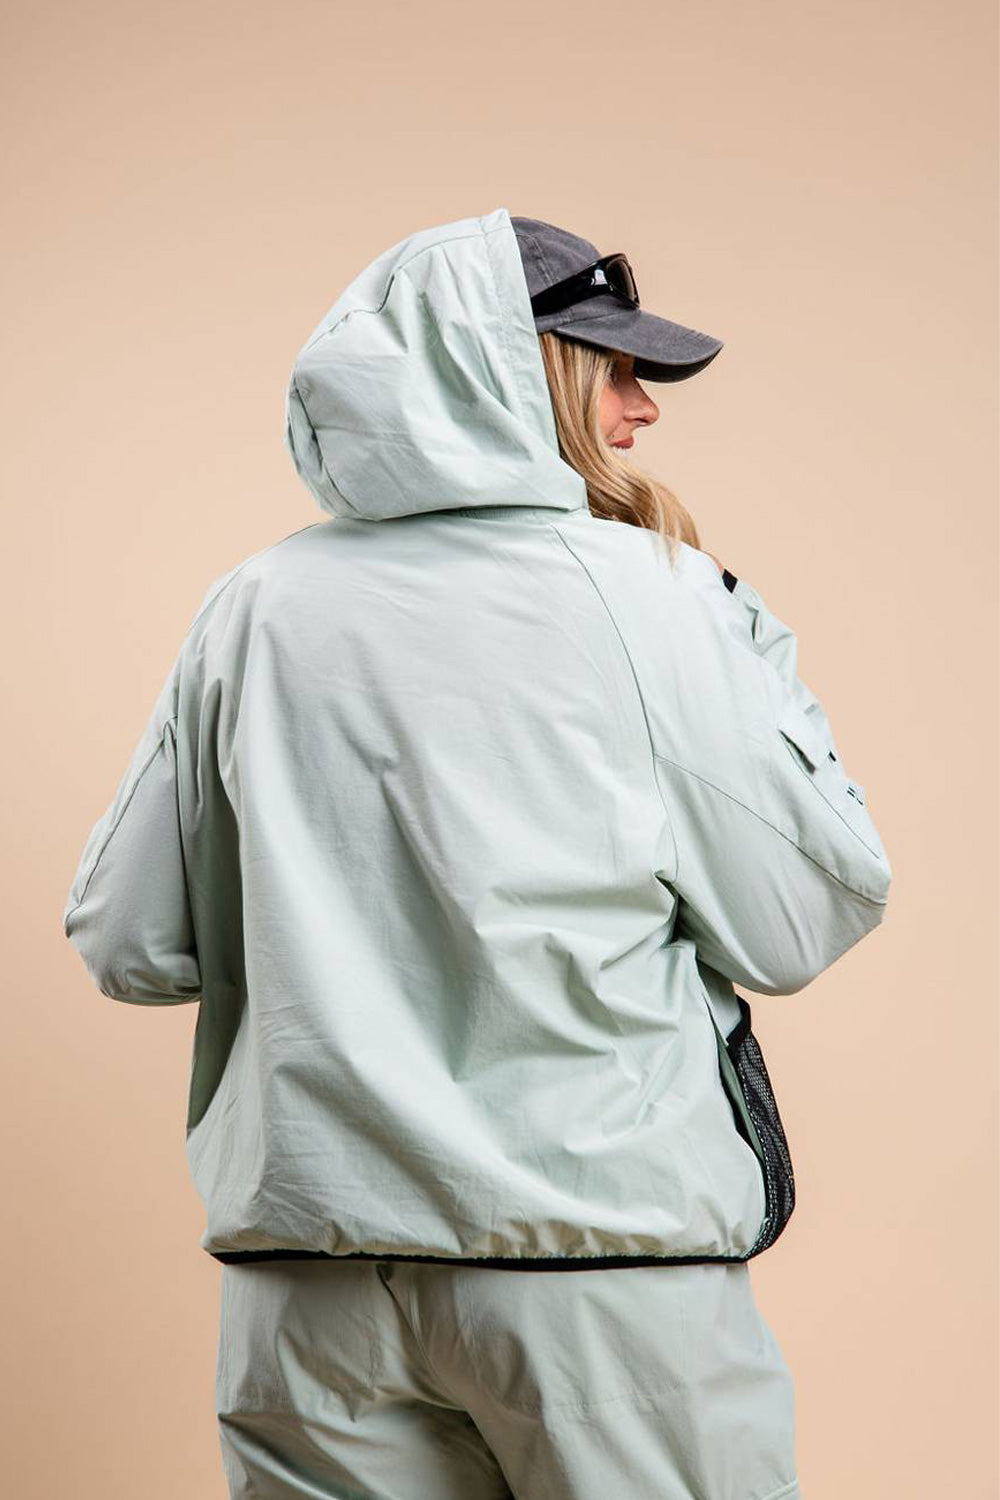 blonde woman with lightweight windbreaker jacket hood on over hat and sunglasses